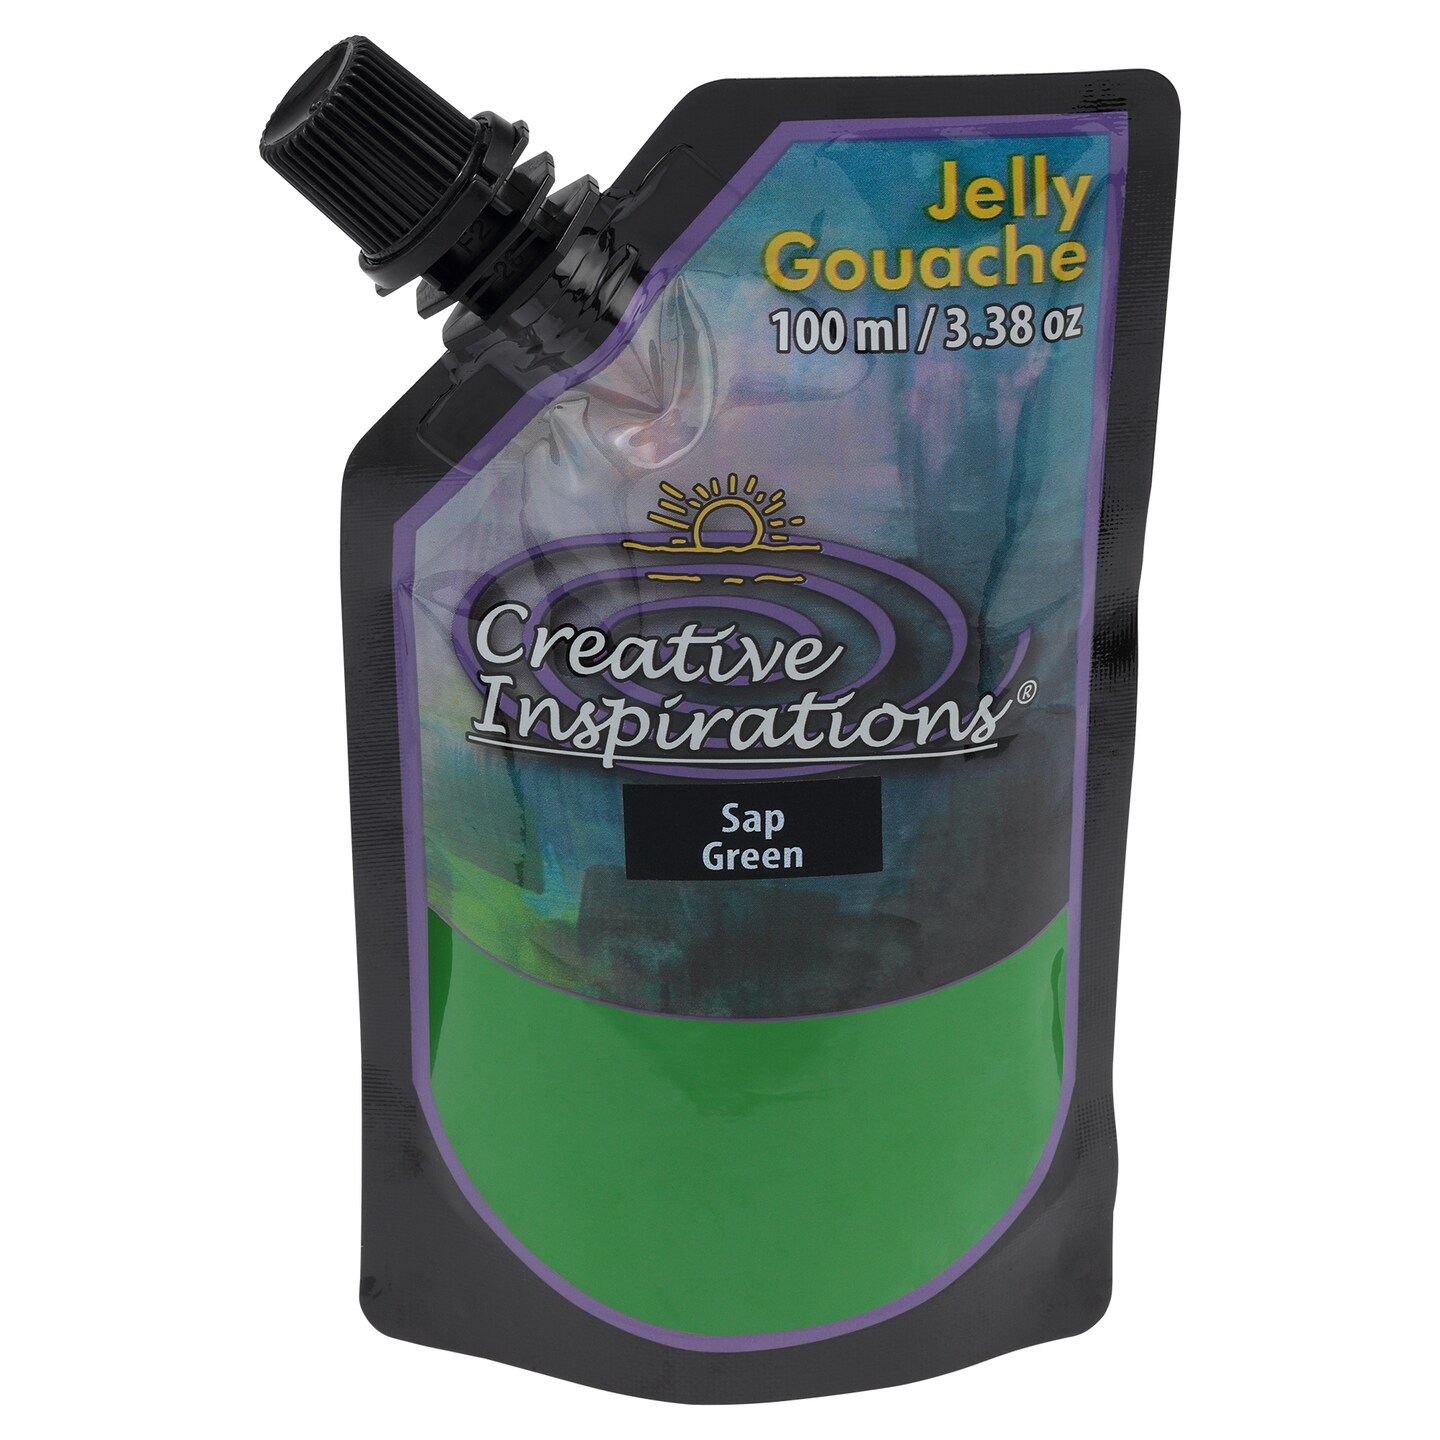 Creative Inspirations Jelly Gouache - Assorted Sizes & Colors | Michaels